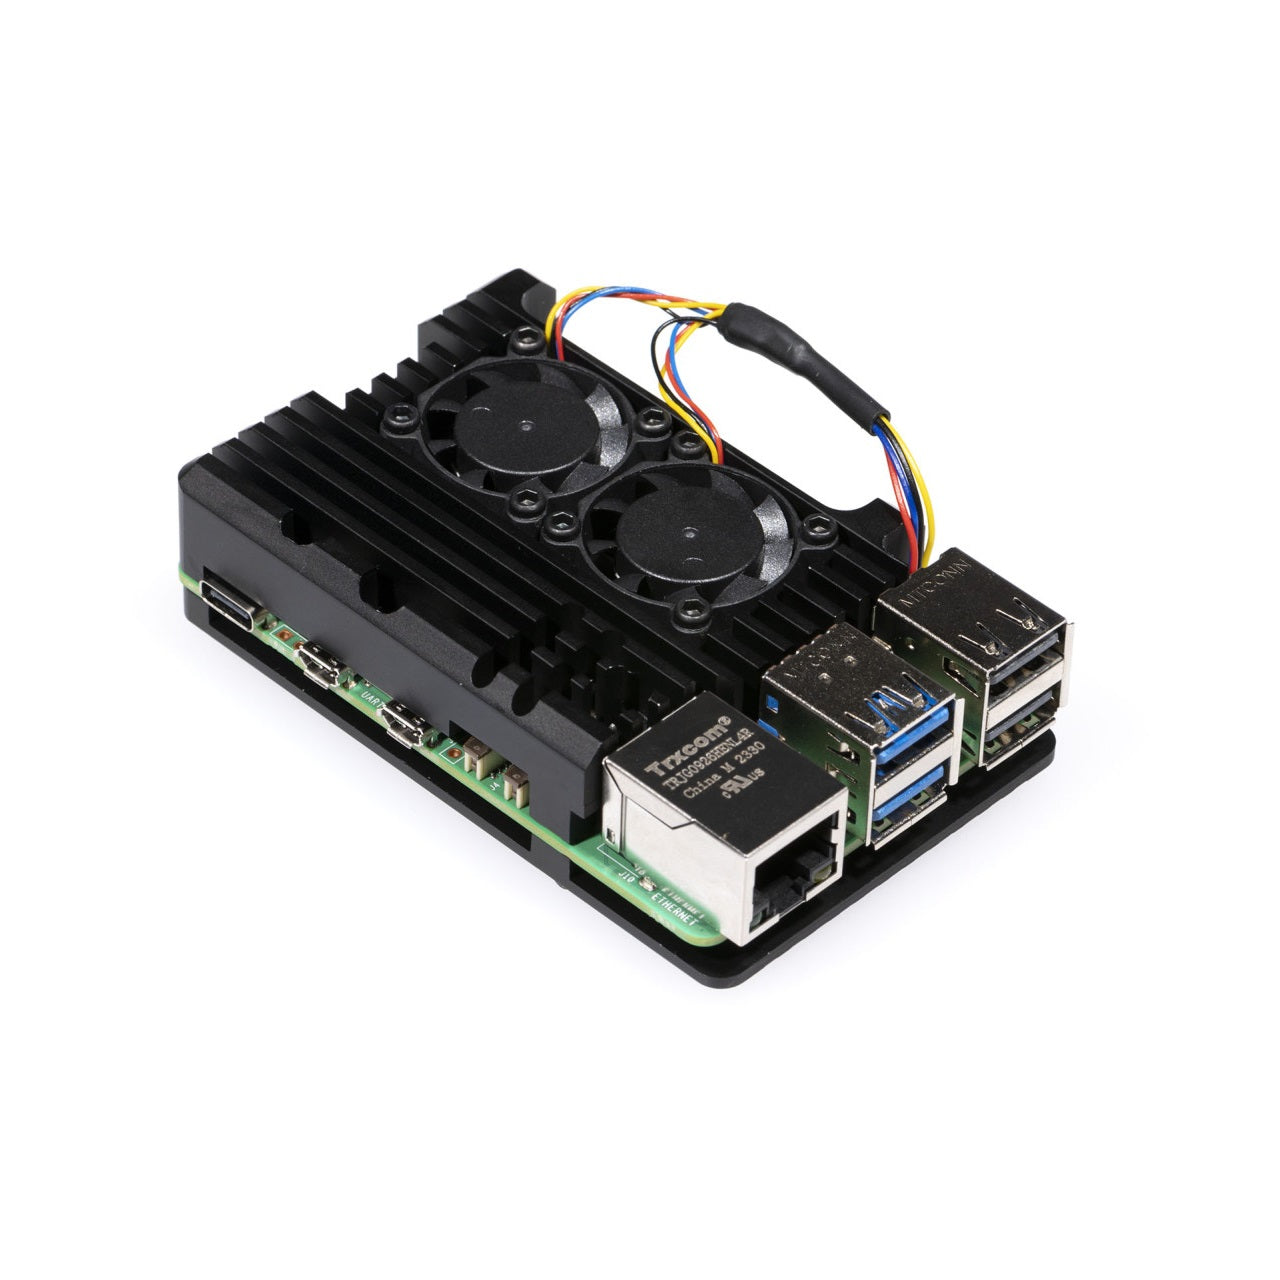 RPI5 Black Aluminum Heat Sink Case with Double Fans for Raspberry Pi 5